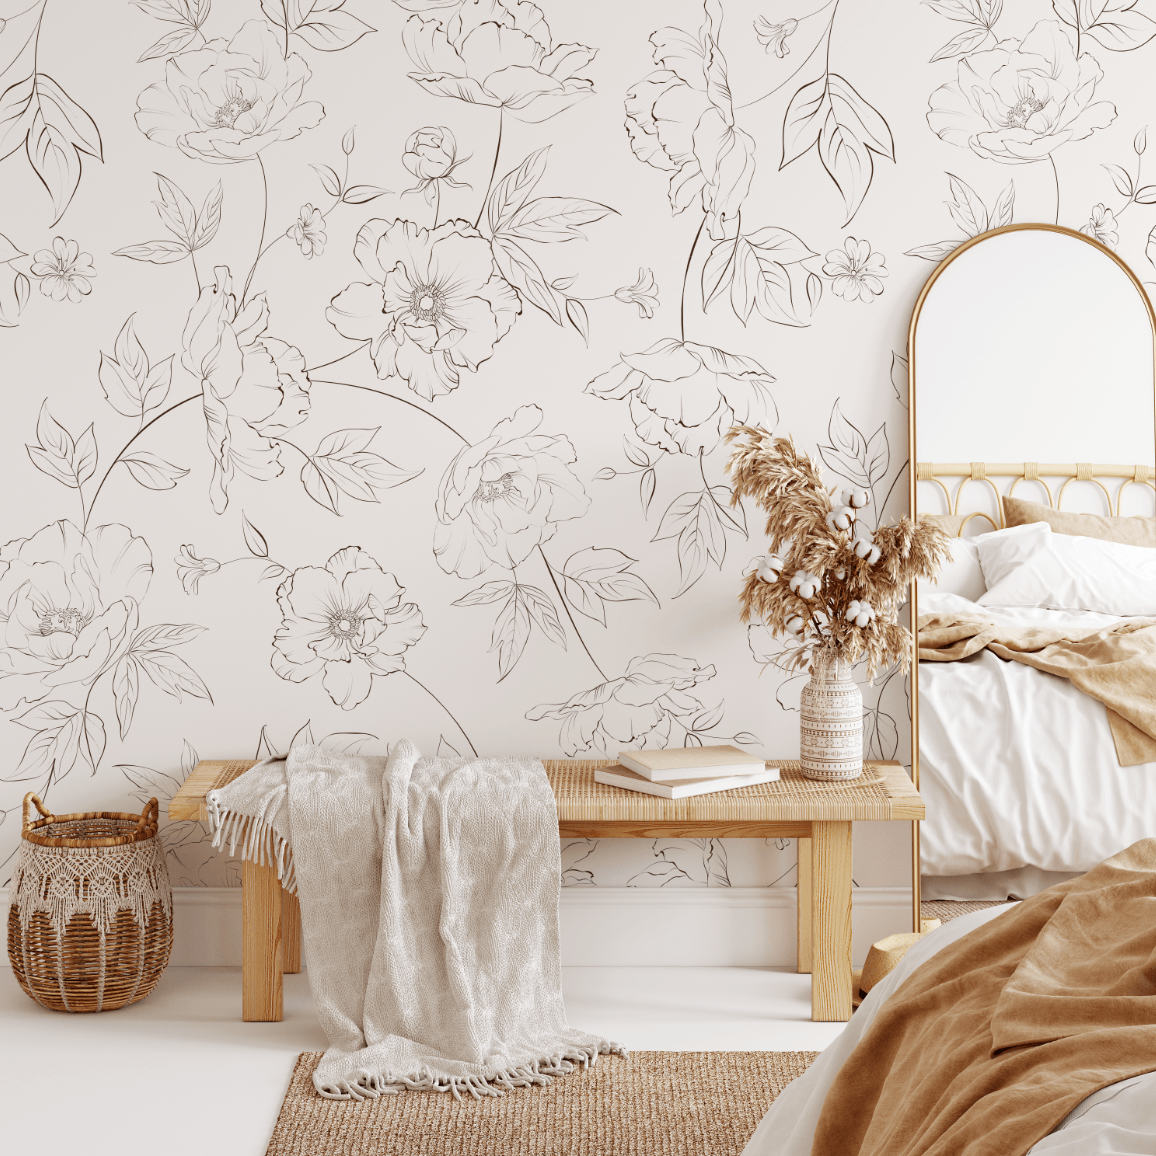 Large Floral Wallpaper Designs - 5 Must-Have Murals | For The Floor & More